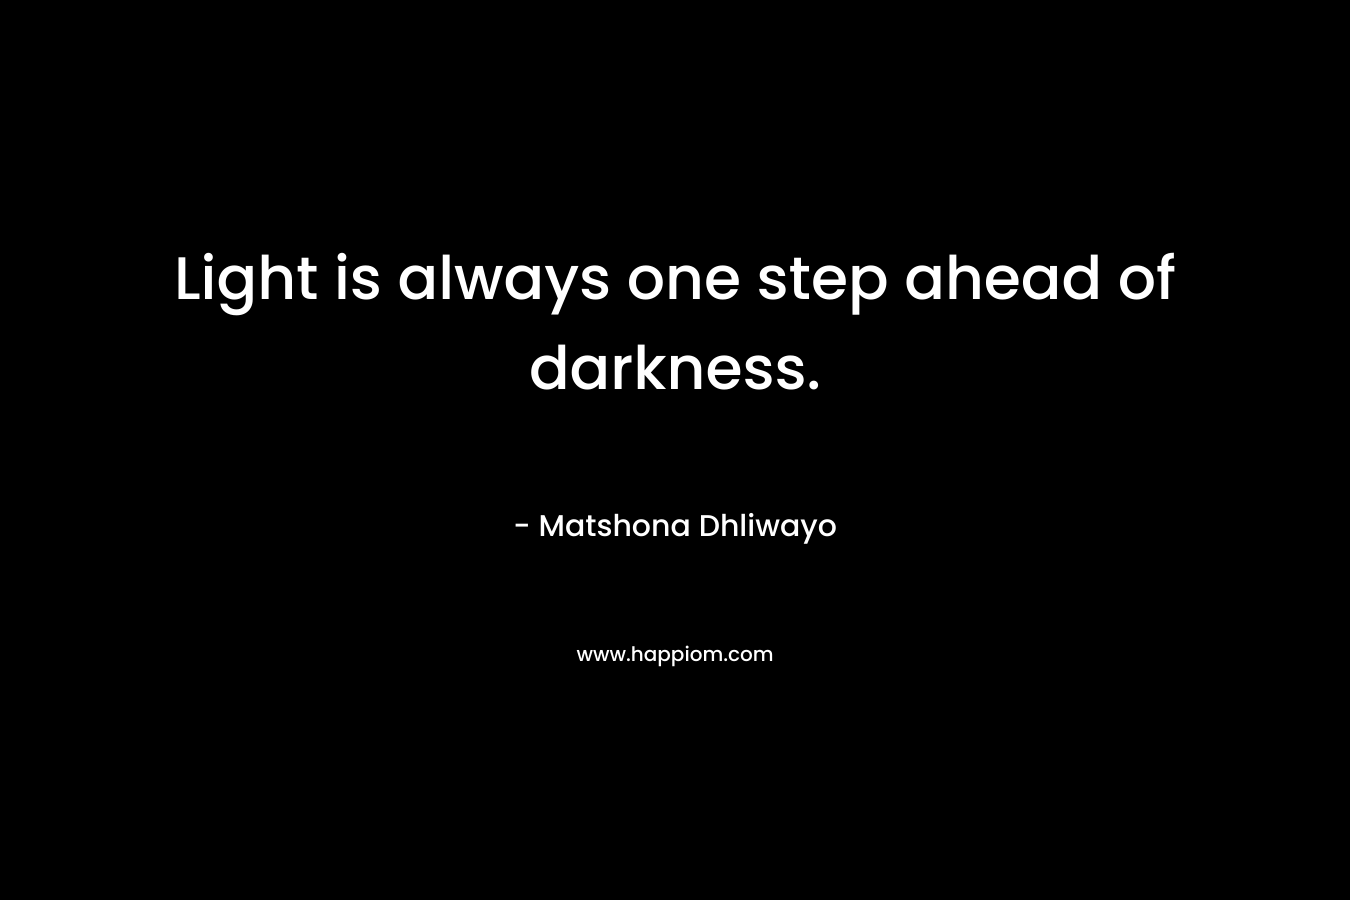 Light is always one step ahead of darkness.